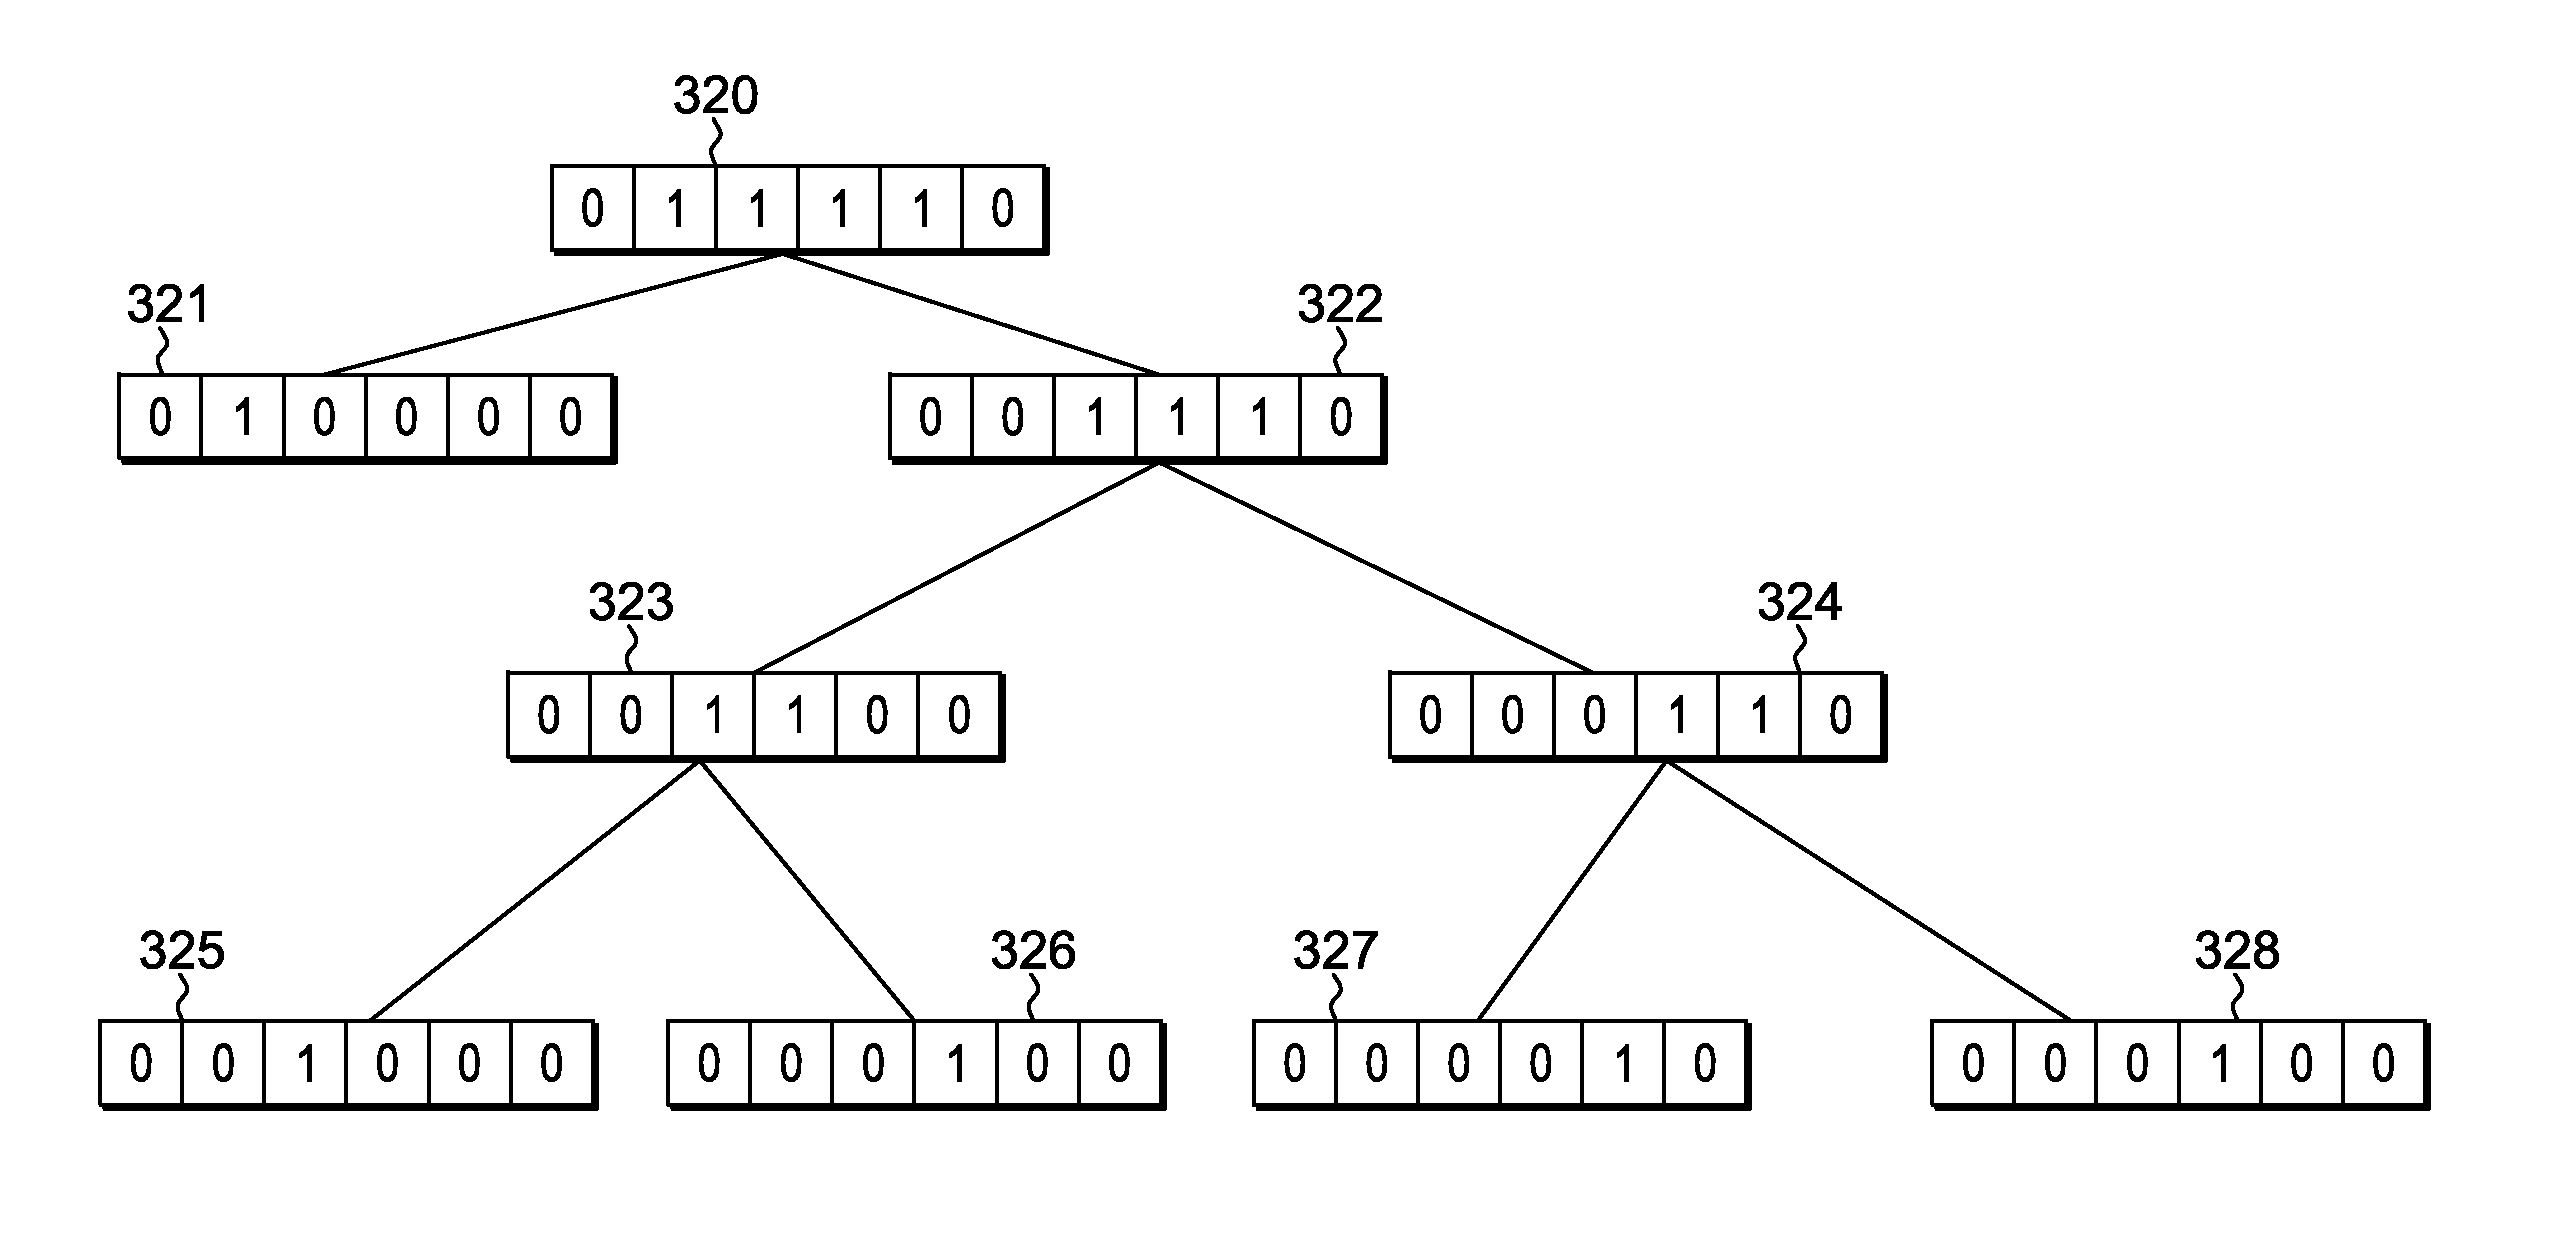 Probabilistically finding the connected components of an undirected graph